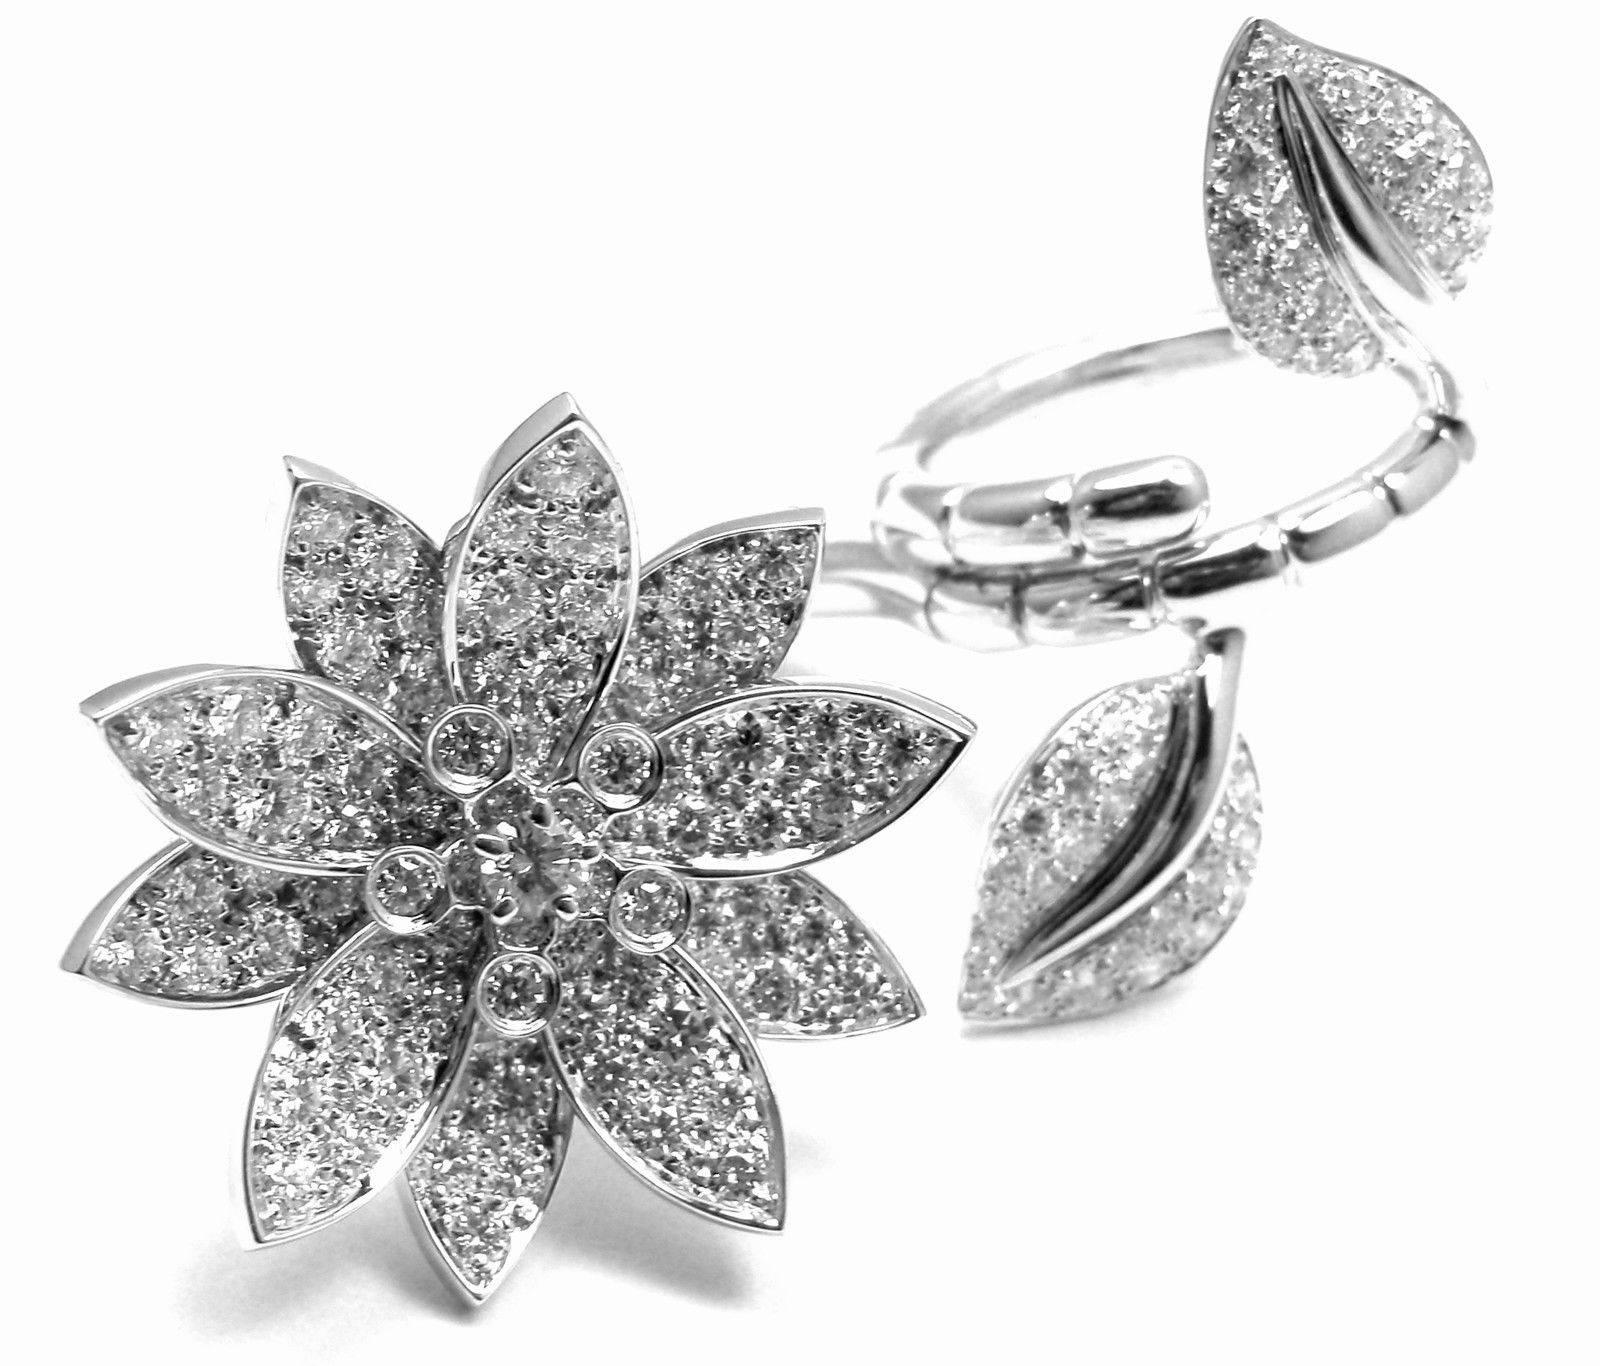 18k White Gold Lotus Flower Diamond Between The Finger Ring by Van Cleef & Arpels.  
With 127 round brilliant cut diamonds VVS1 clarity, E color
total weight approx. 2.26ct 
This ring comes with Van Cleef & Arpels box.  

Details:  
Weight: